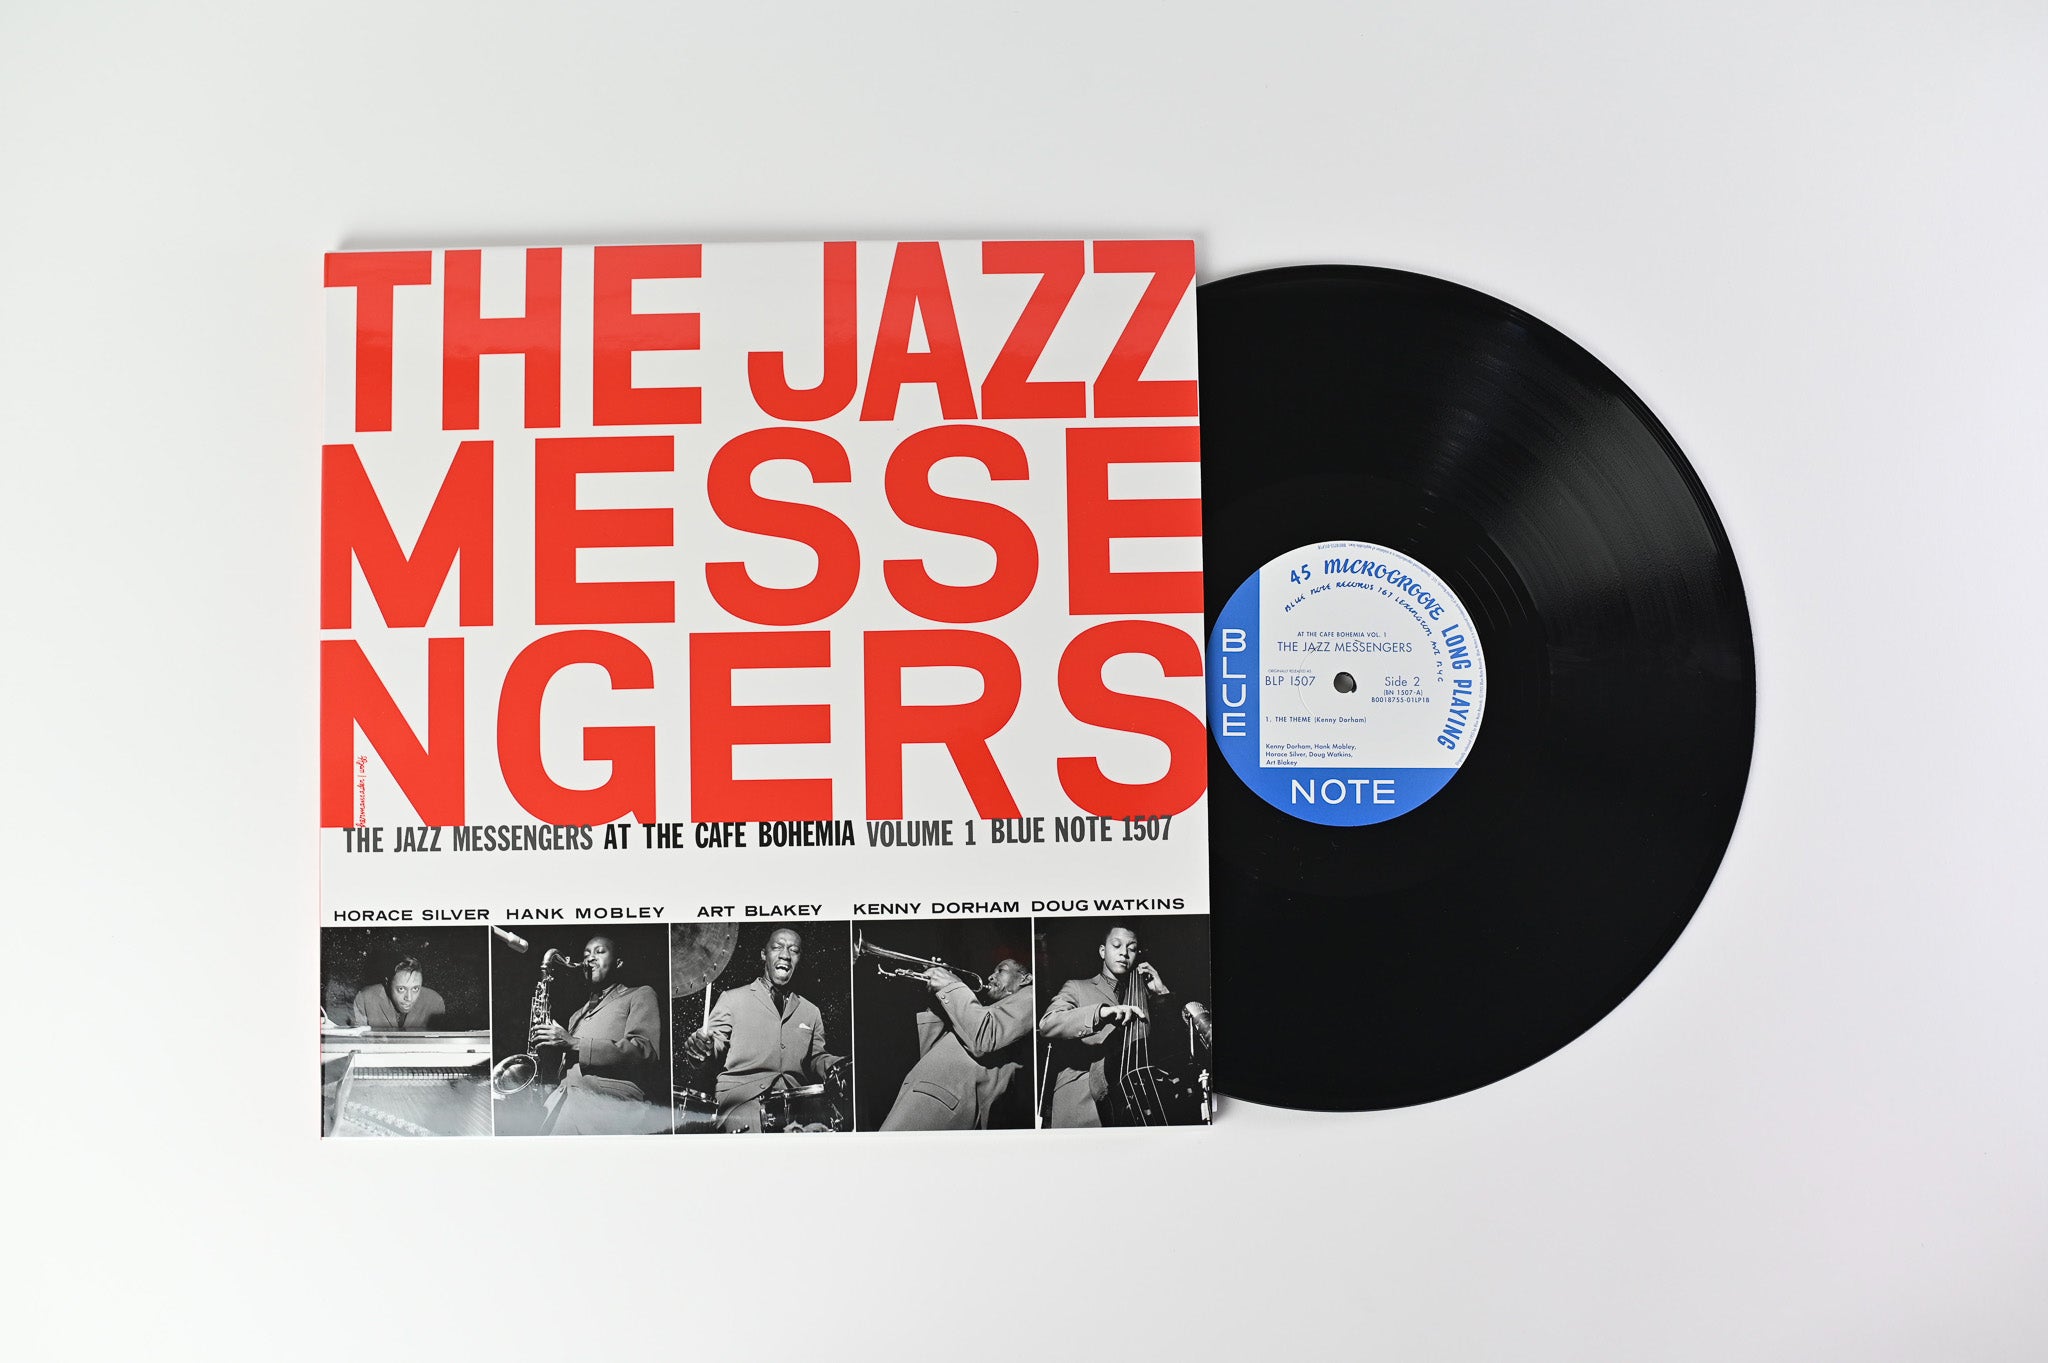 Art Blakey & The Jazz Messengers - At The Cafe Bohemia Volume 1 on Blue Note Music Matters Ltd Numbered 45 RPM